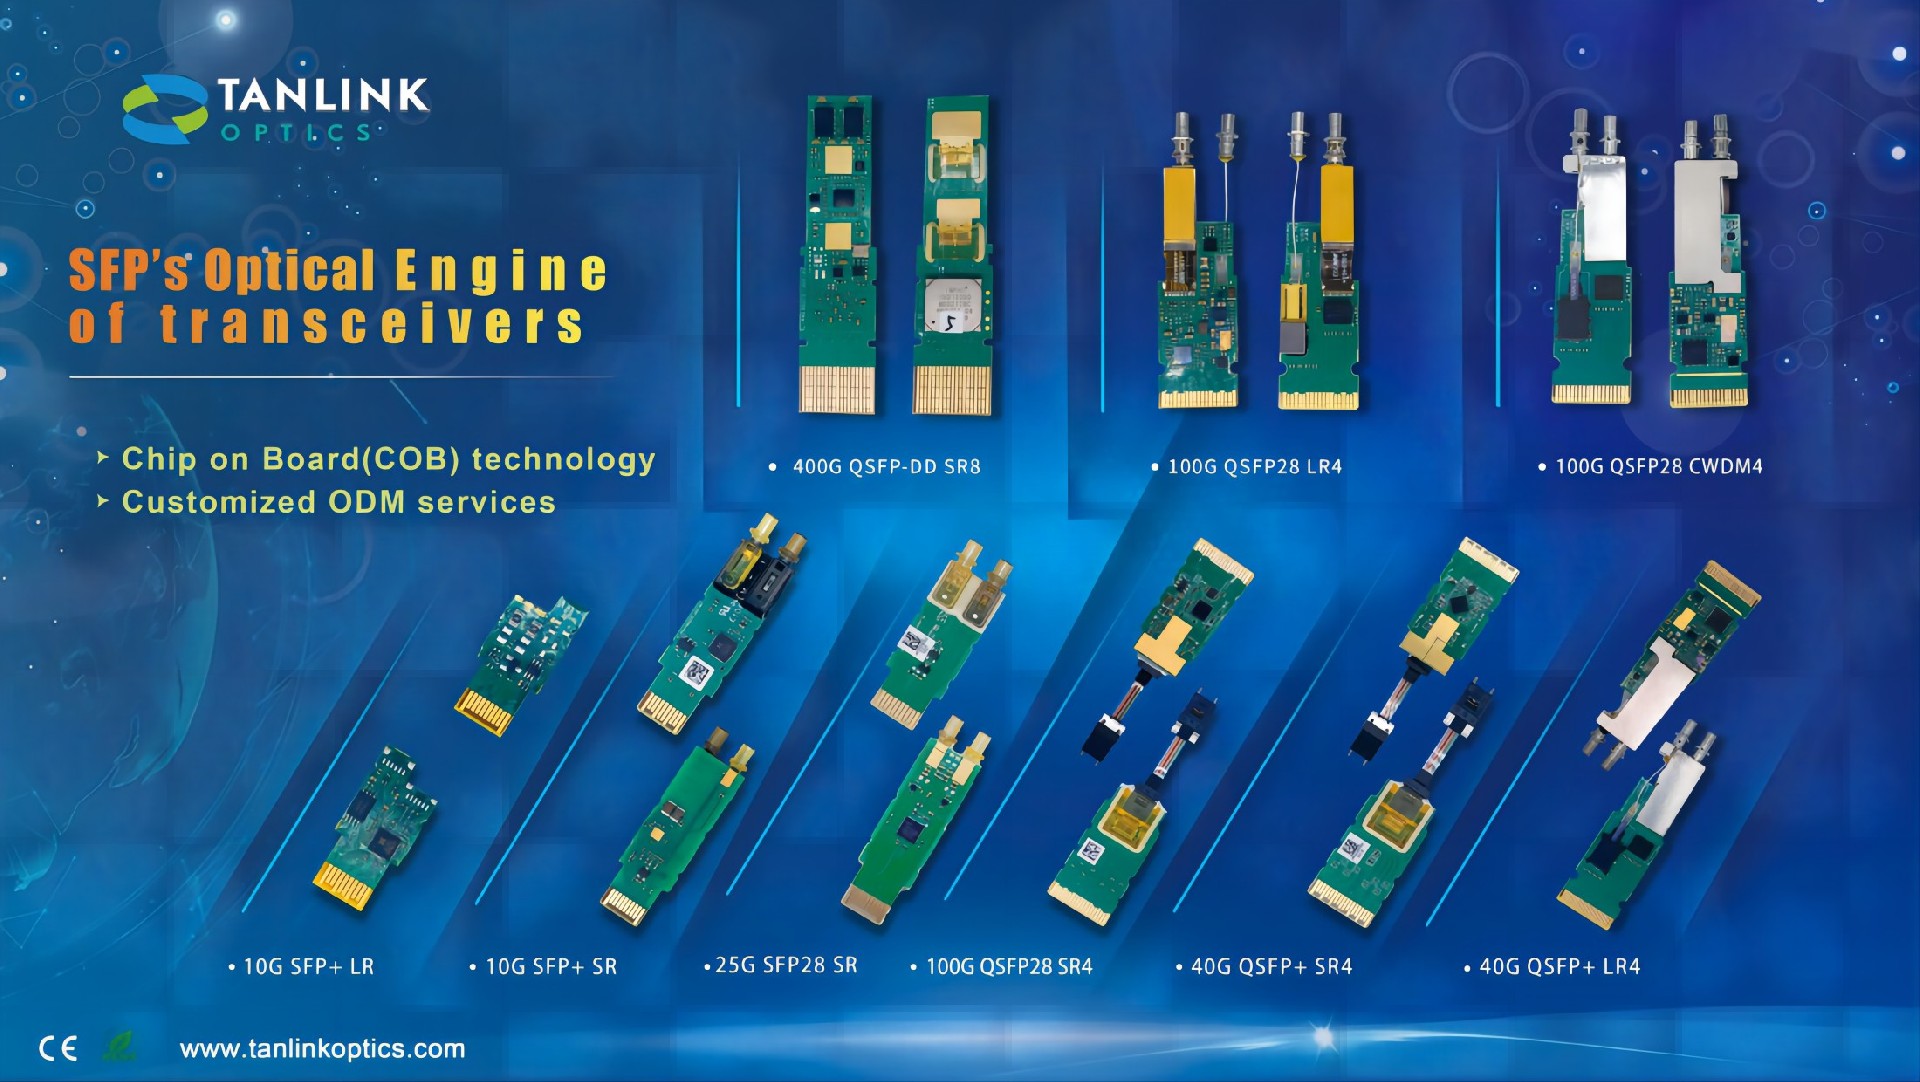 Cutting-edge COB tech Optical Engines in SFP Transceivers